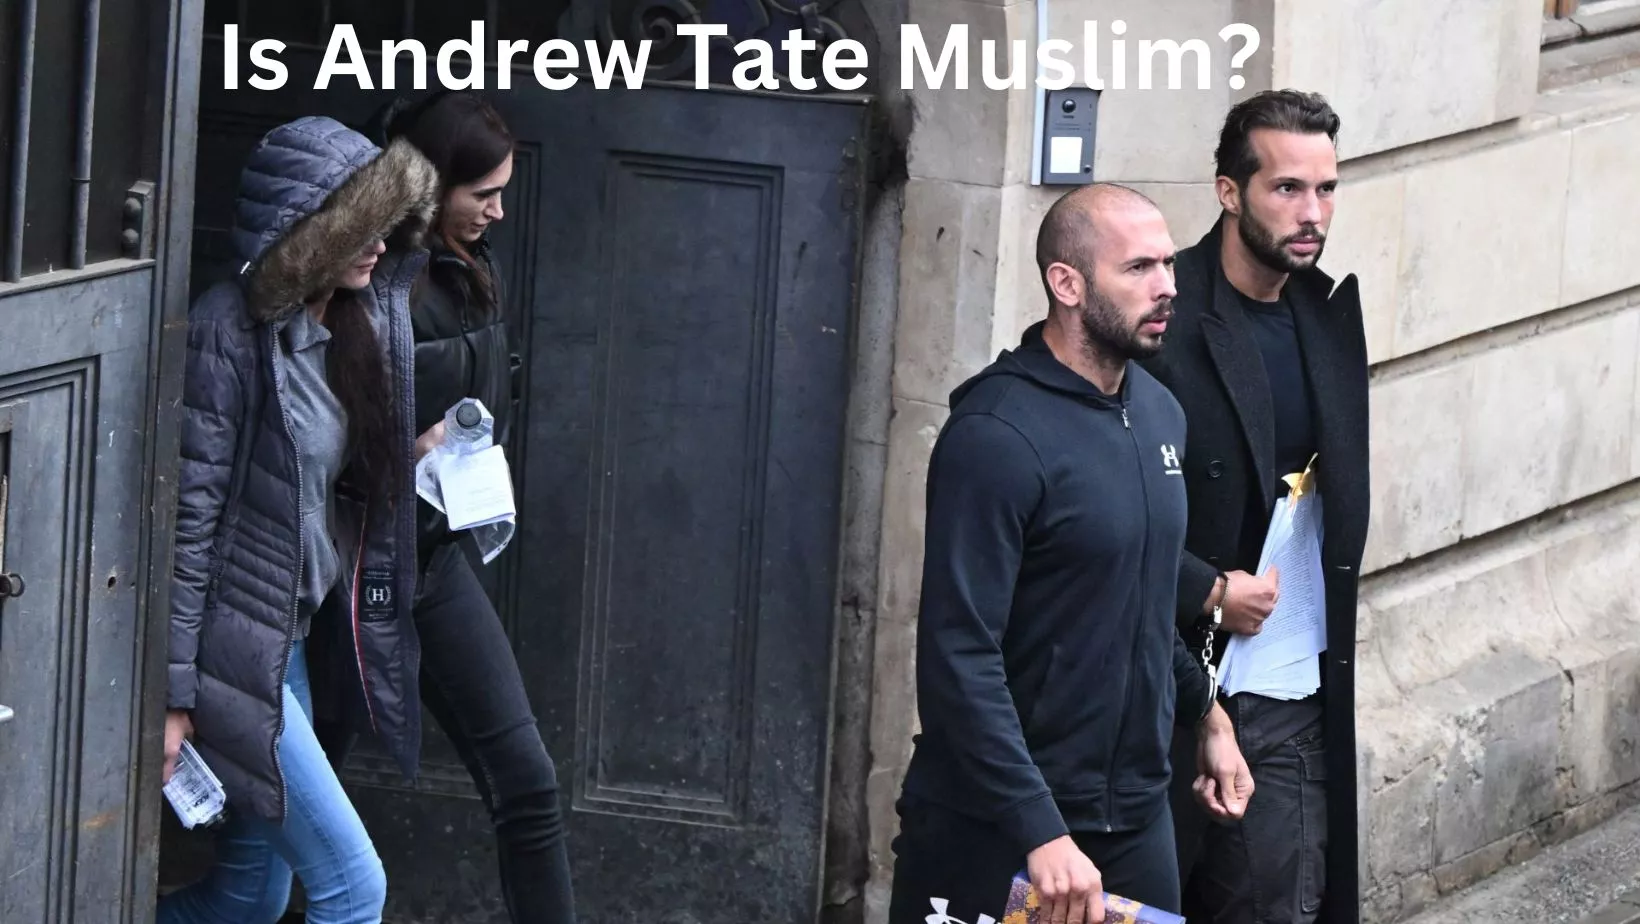 Is Andrew Tate Muslim